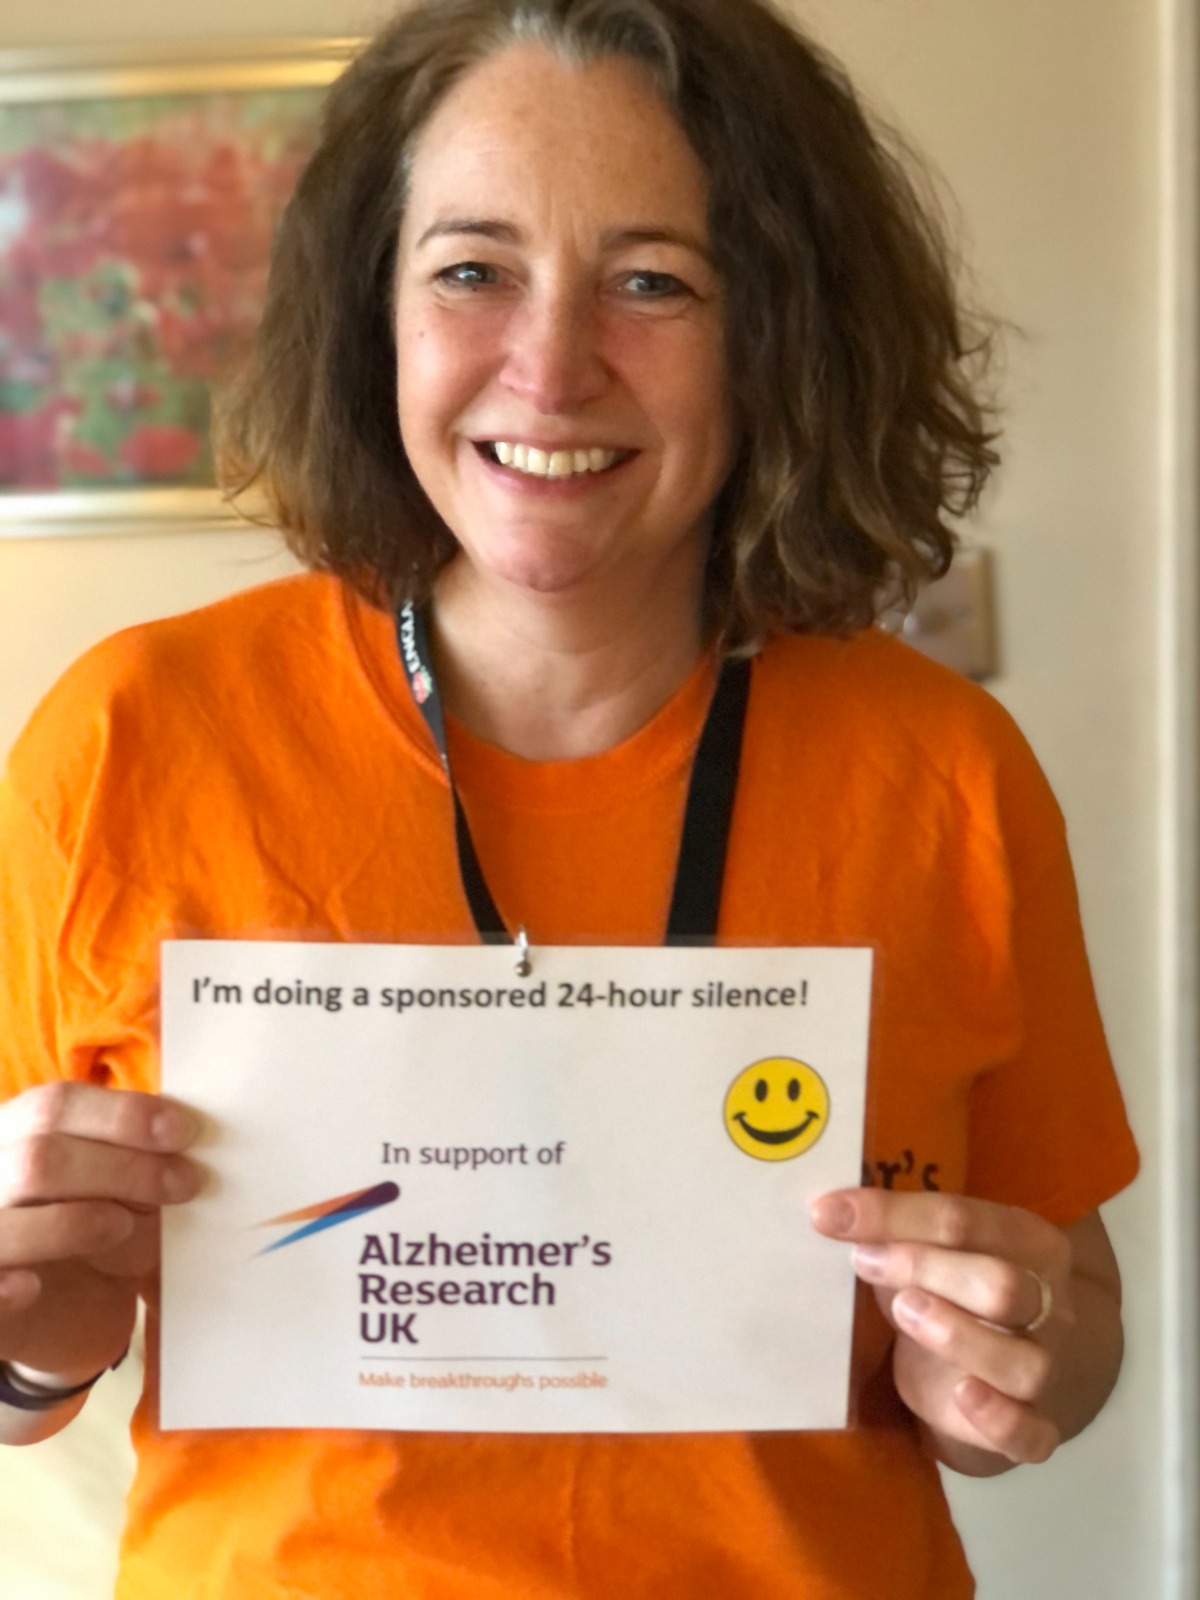 Shelle Luscombe, 51, from Hampton in London, said she “wanted to do something memorable” when she turned 50, so set about inviting challenges from friends to raise money for Alzheimer’s Research UK in 2021